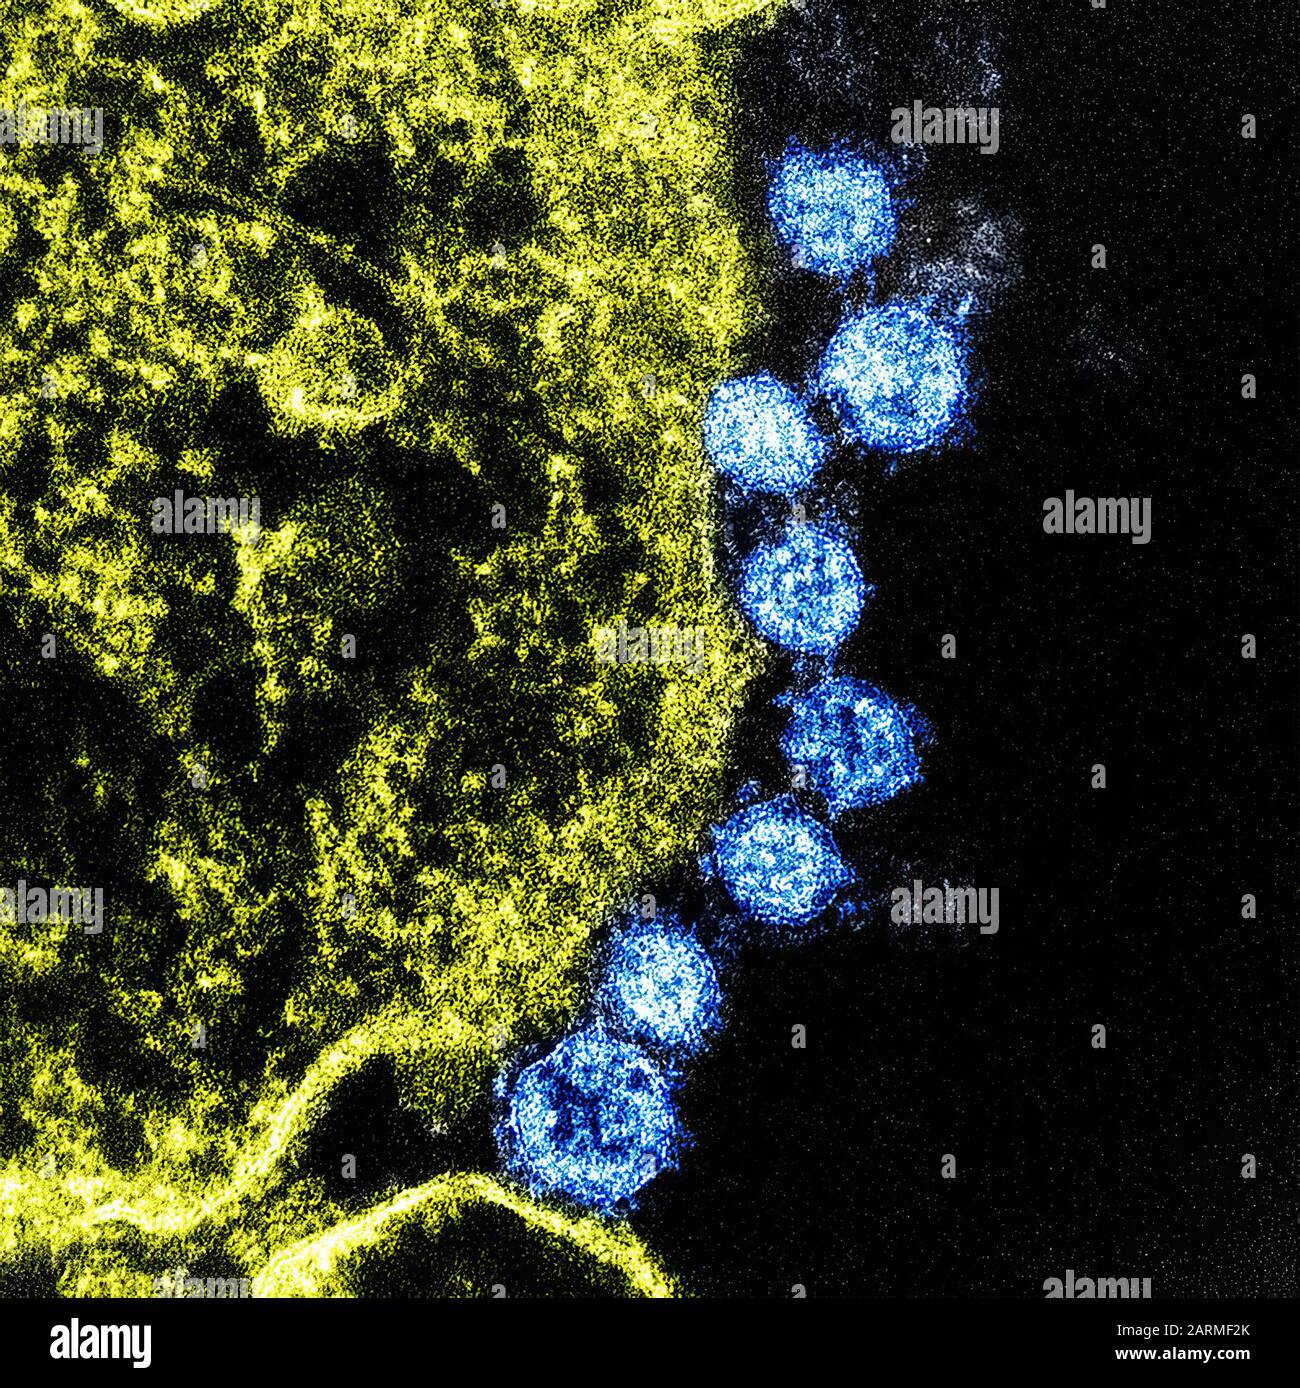 Colorized transmission electron micrograph MERS virus particles (blue) found near the periphery of an infected VERO E6 cell (yellow). Image captured and color-enhanced at the NIAID Integrated Research Facility in Fort Detrick, Maryland.2019 Novel Coronavirus (2019-nCoV) is a virus (more specifically, a coronavirus) identified as the cause of an outbreak of respiratory illness first detected in Wuhan, China. Stock Photo